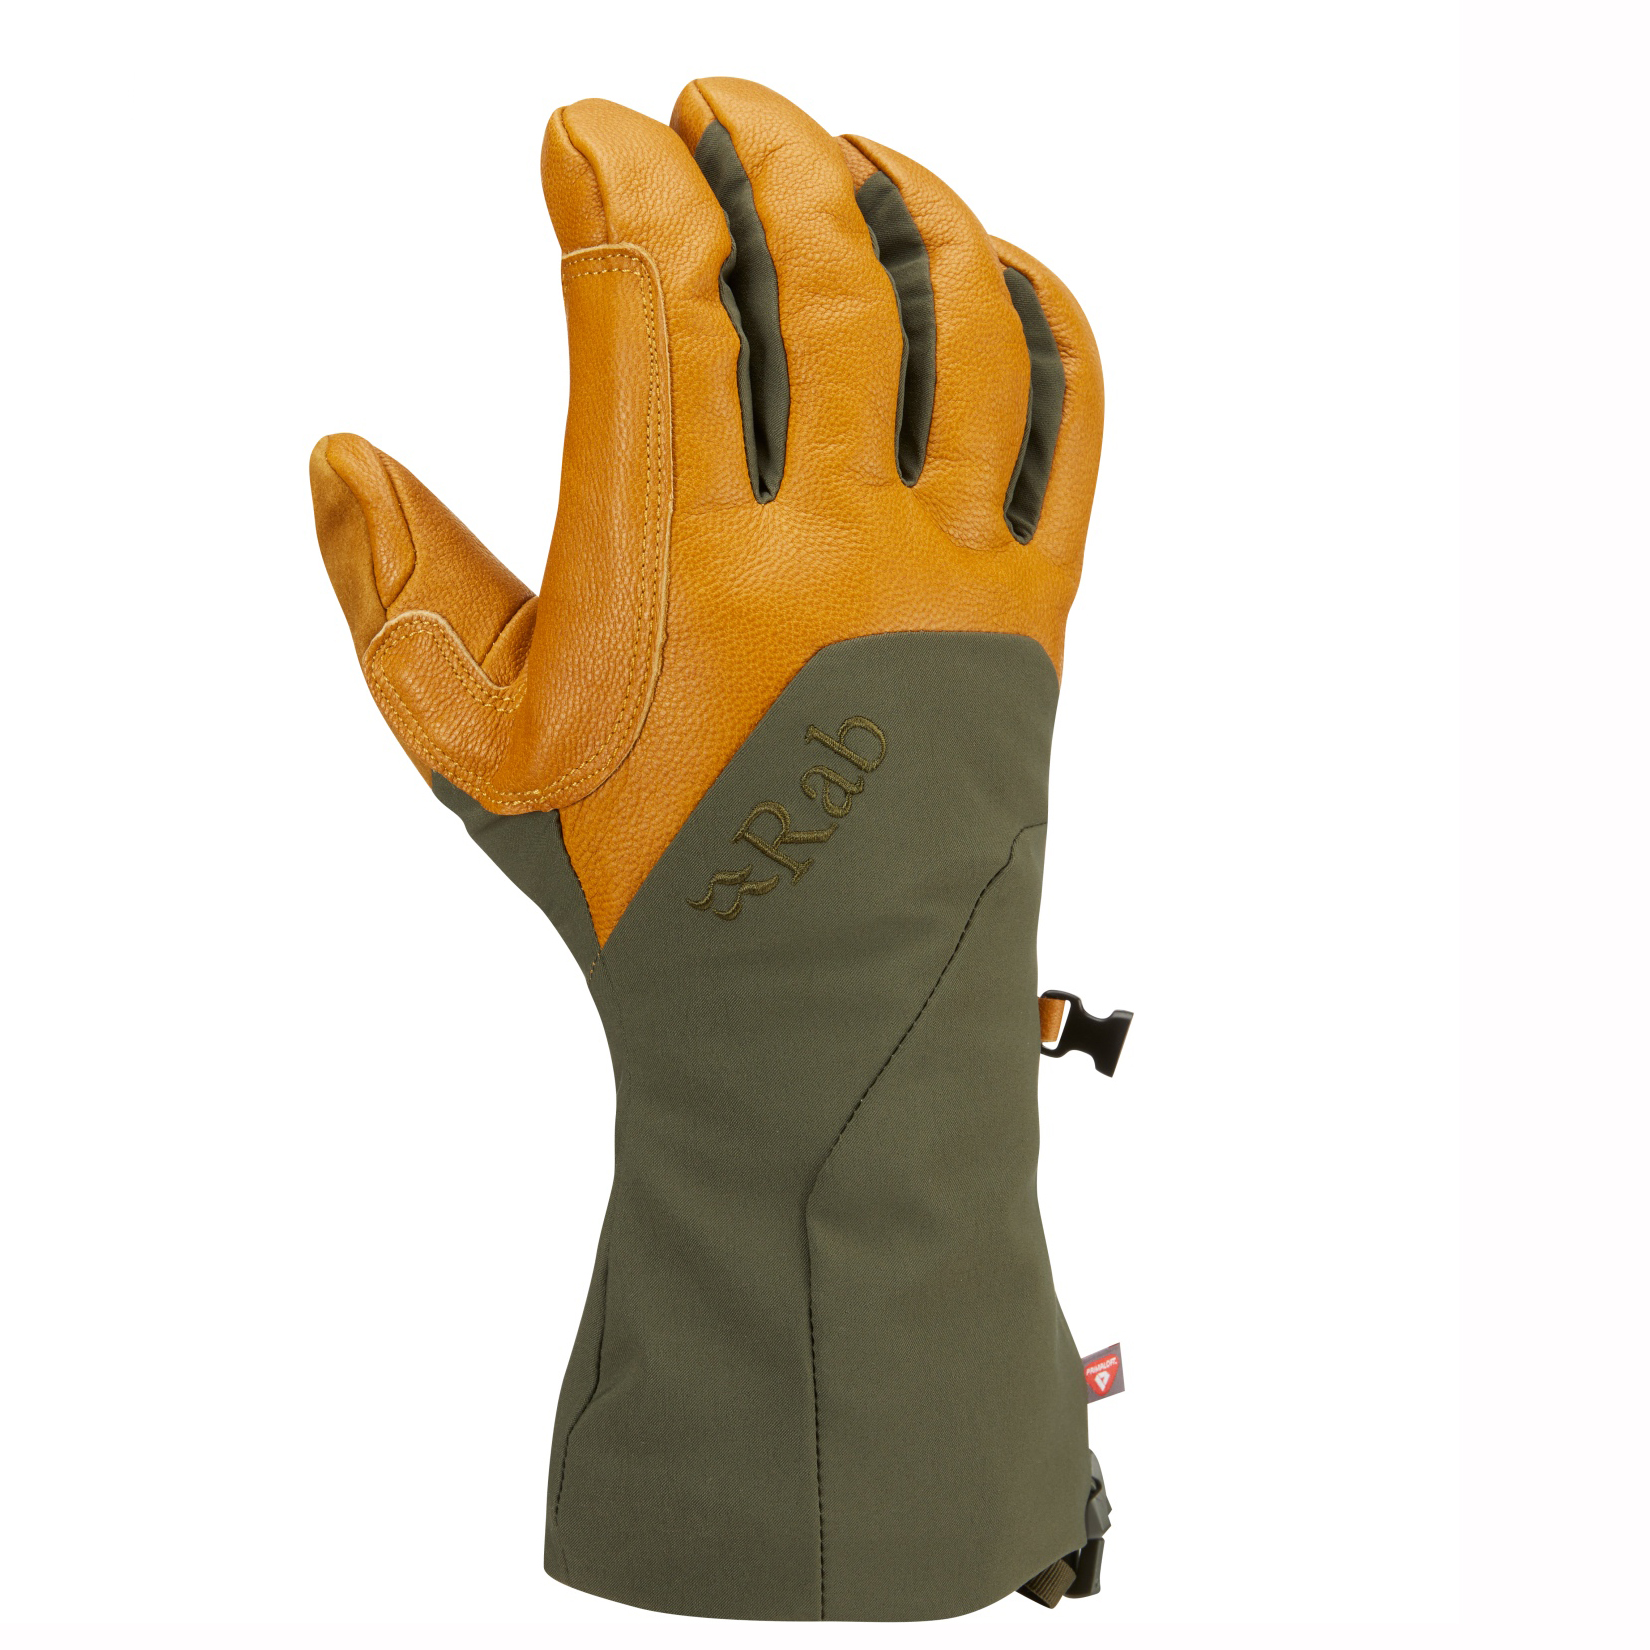 Picture of Rab Khroma Freeride GTX Gloves - army